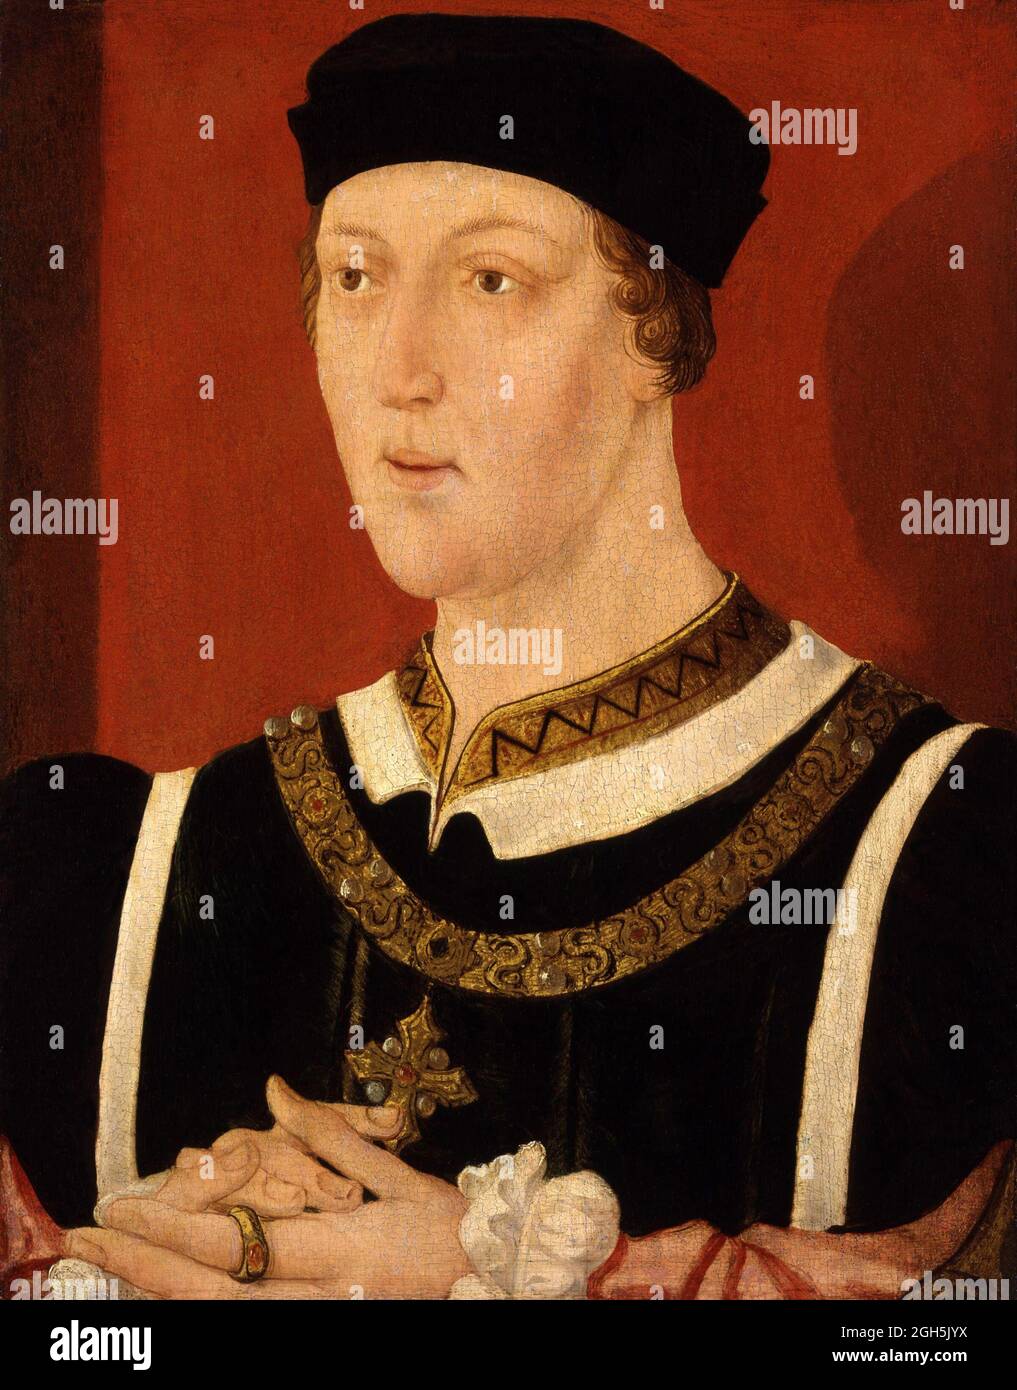 A portrait of King Henry VI who was King of England from 1422 until 1461 Stock Photo